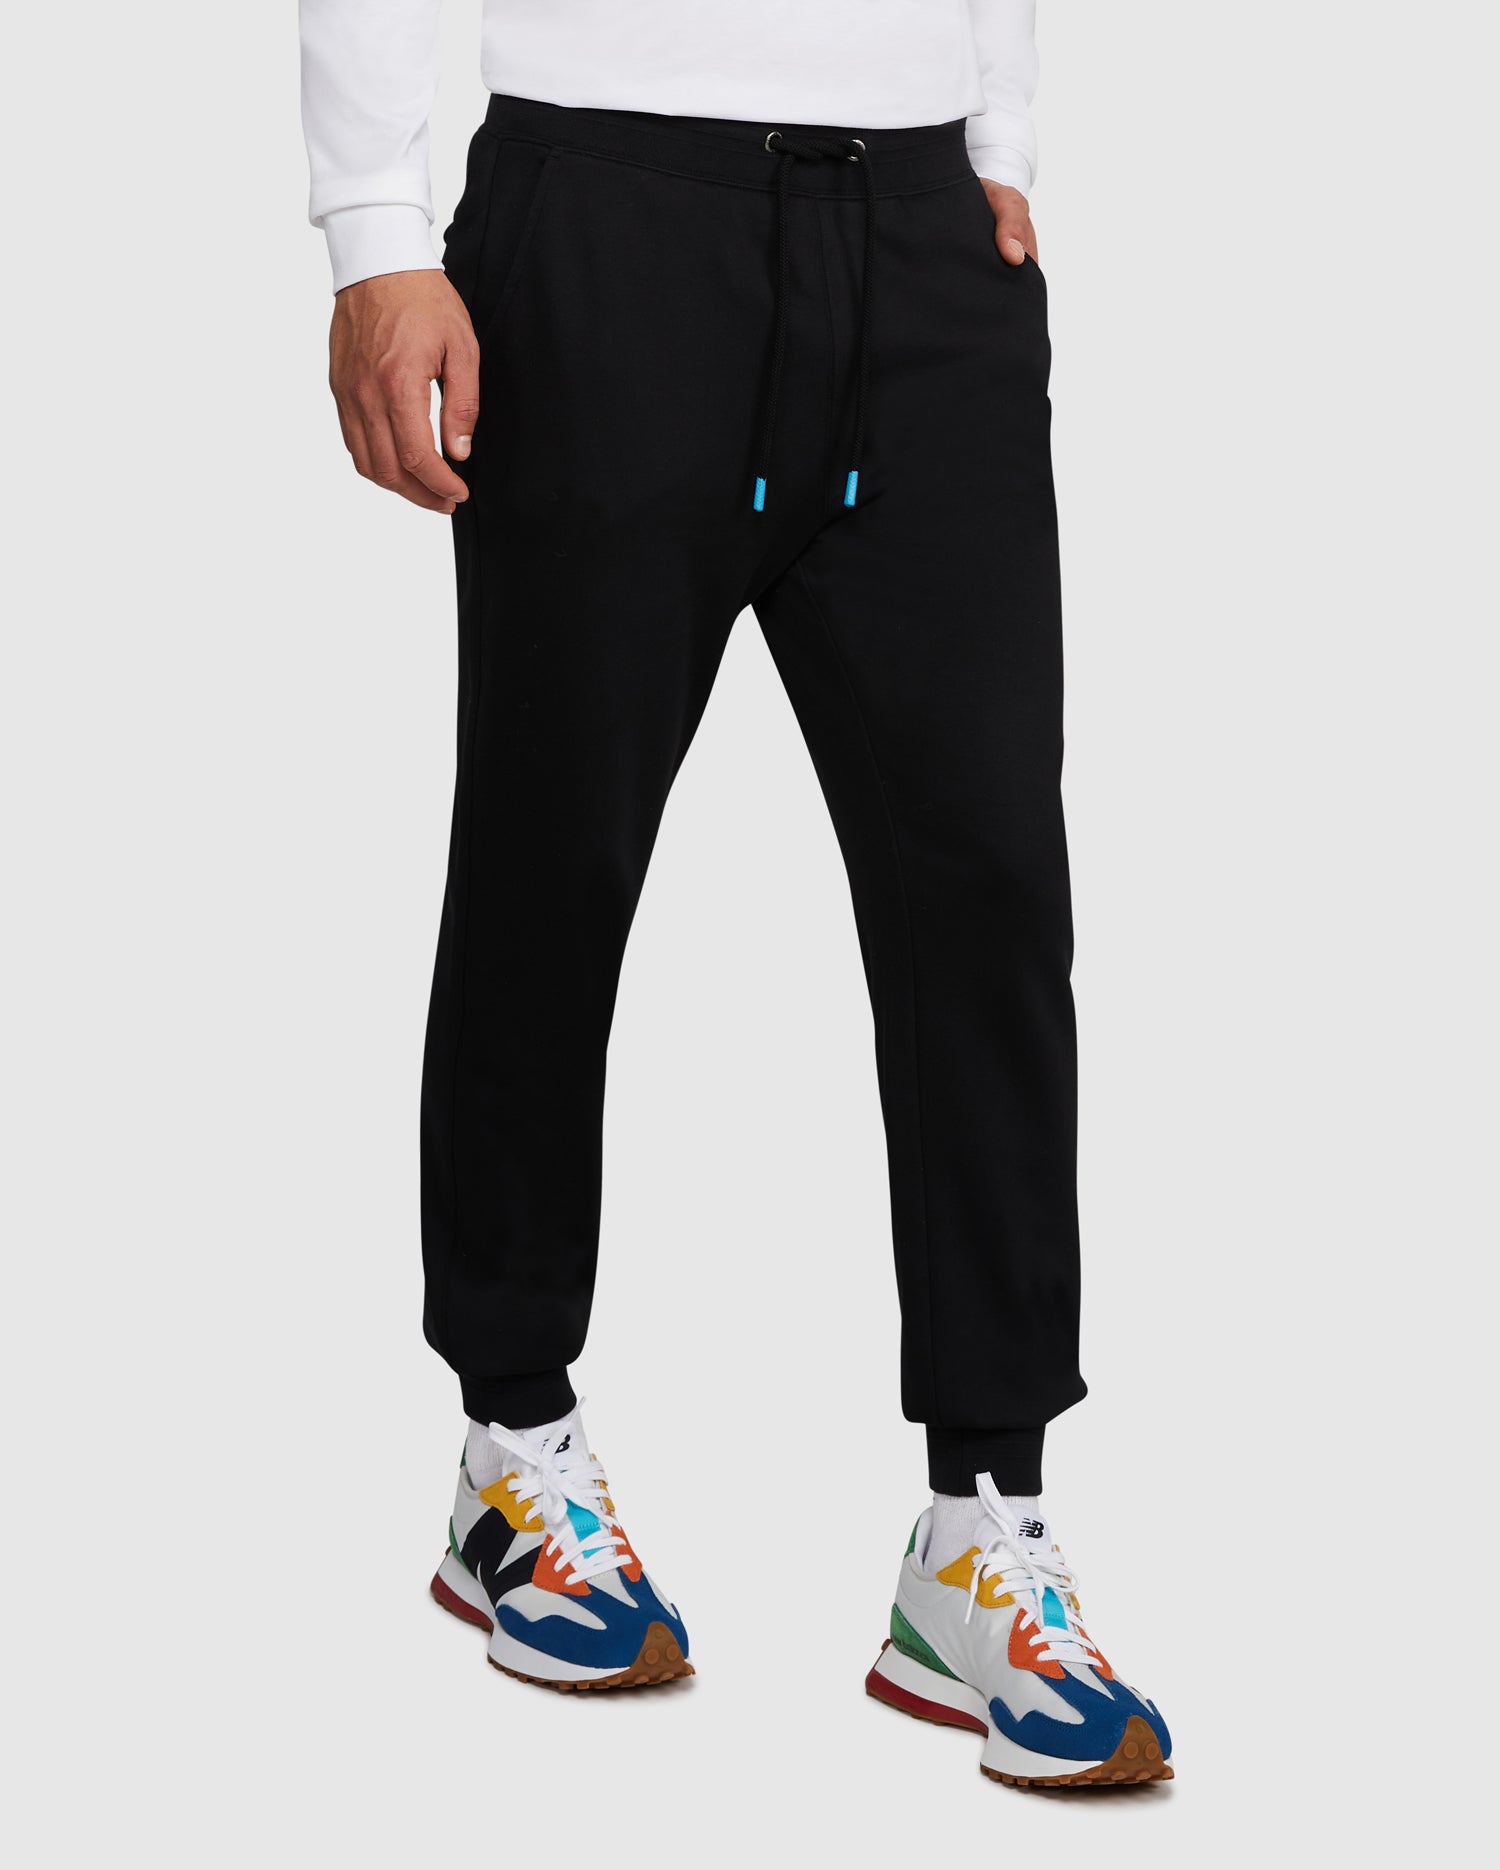 Buy Psycho Bunny Bennett Big & Tall Sweatpant at In Style